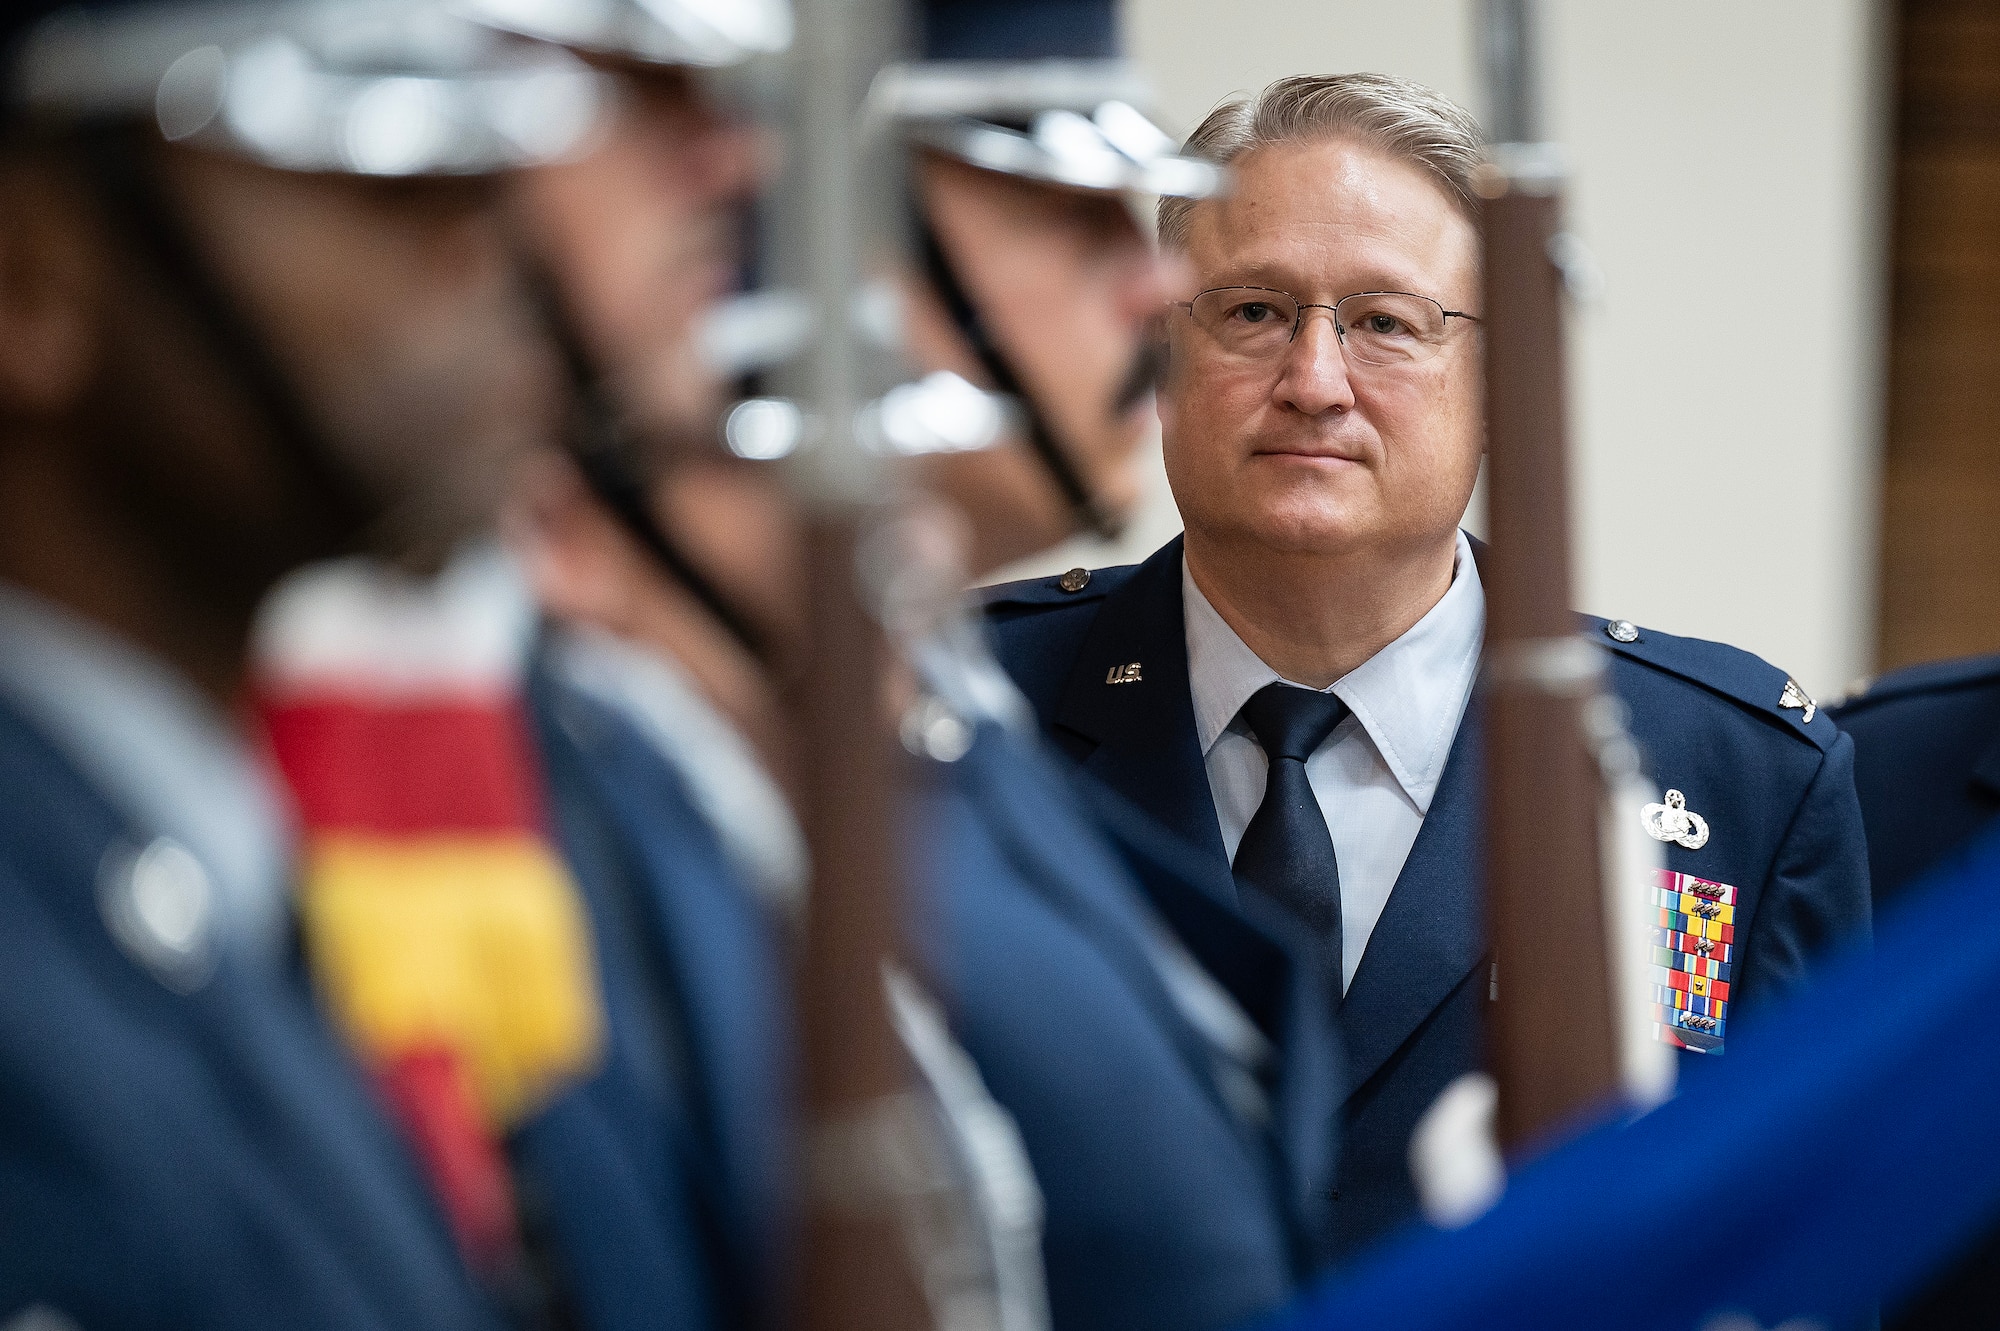 Col. Carl Pawling assumed command of the Air Force Manpower Analysis Agency from Col. James C. Barger during a change of command ceremony July 28, 2023, Joint Base San Antonio-Randolph